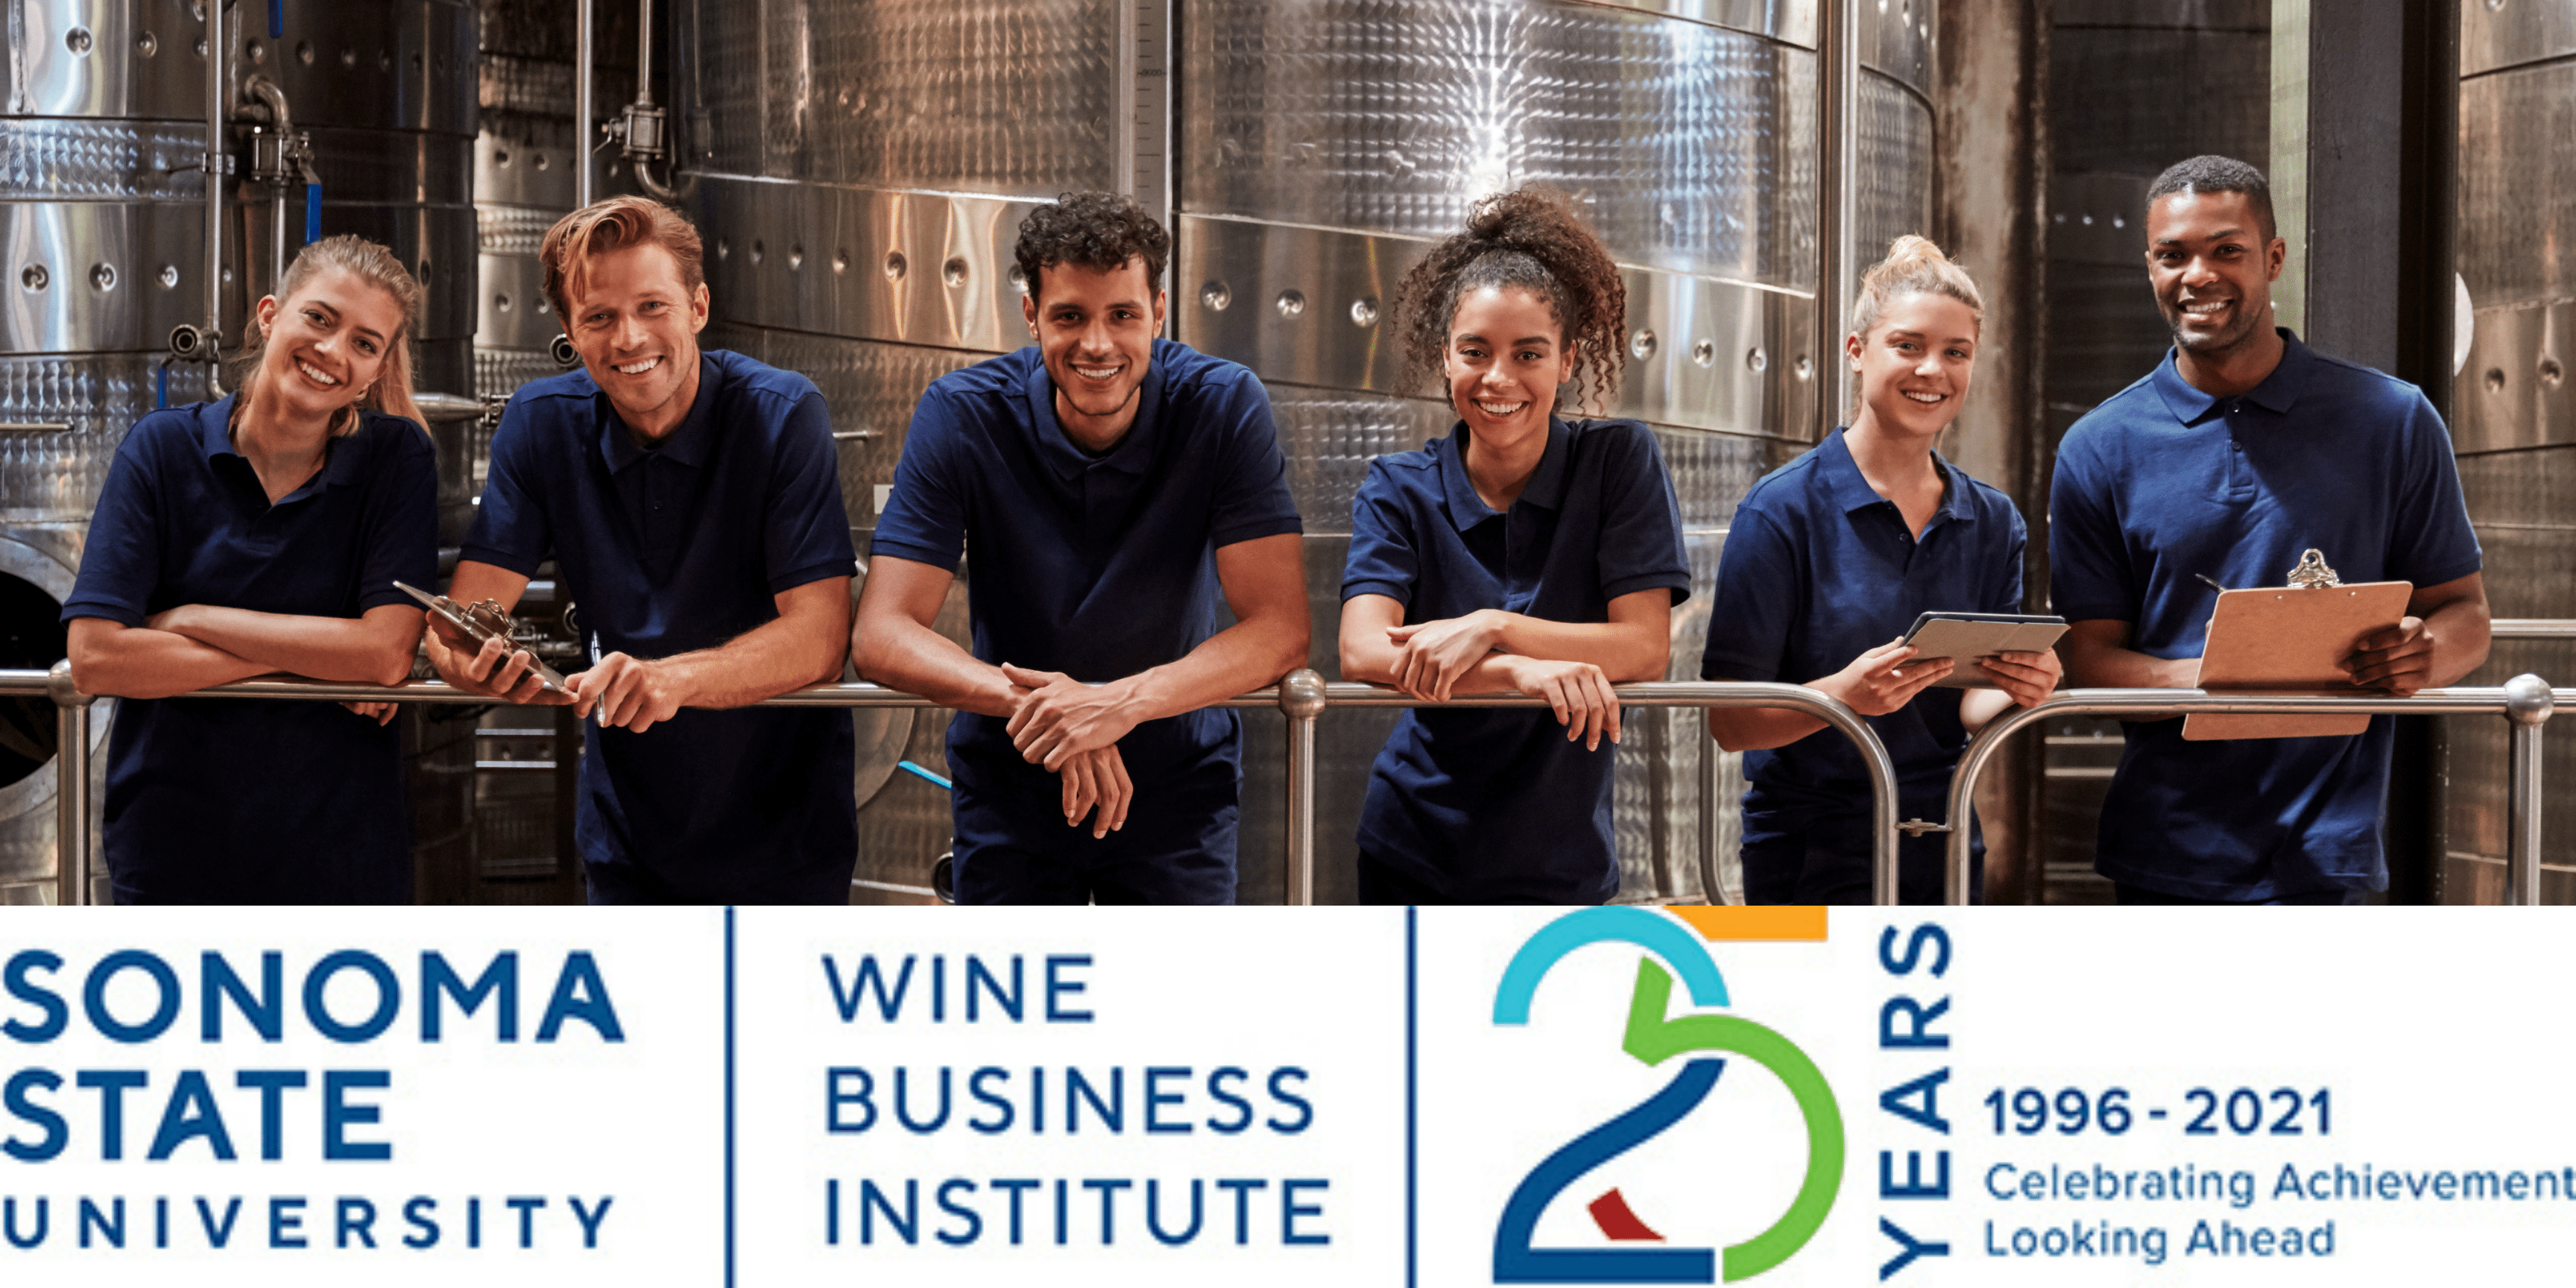 six_people_standing_in_front_of_wine_fermenters_and_leaning_on_railing_with_Wine_Business_Institute_Logo_below